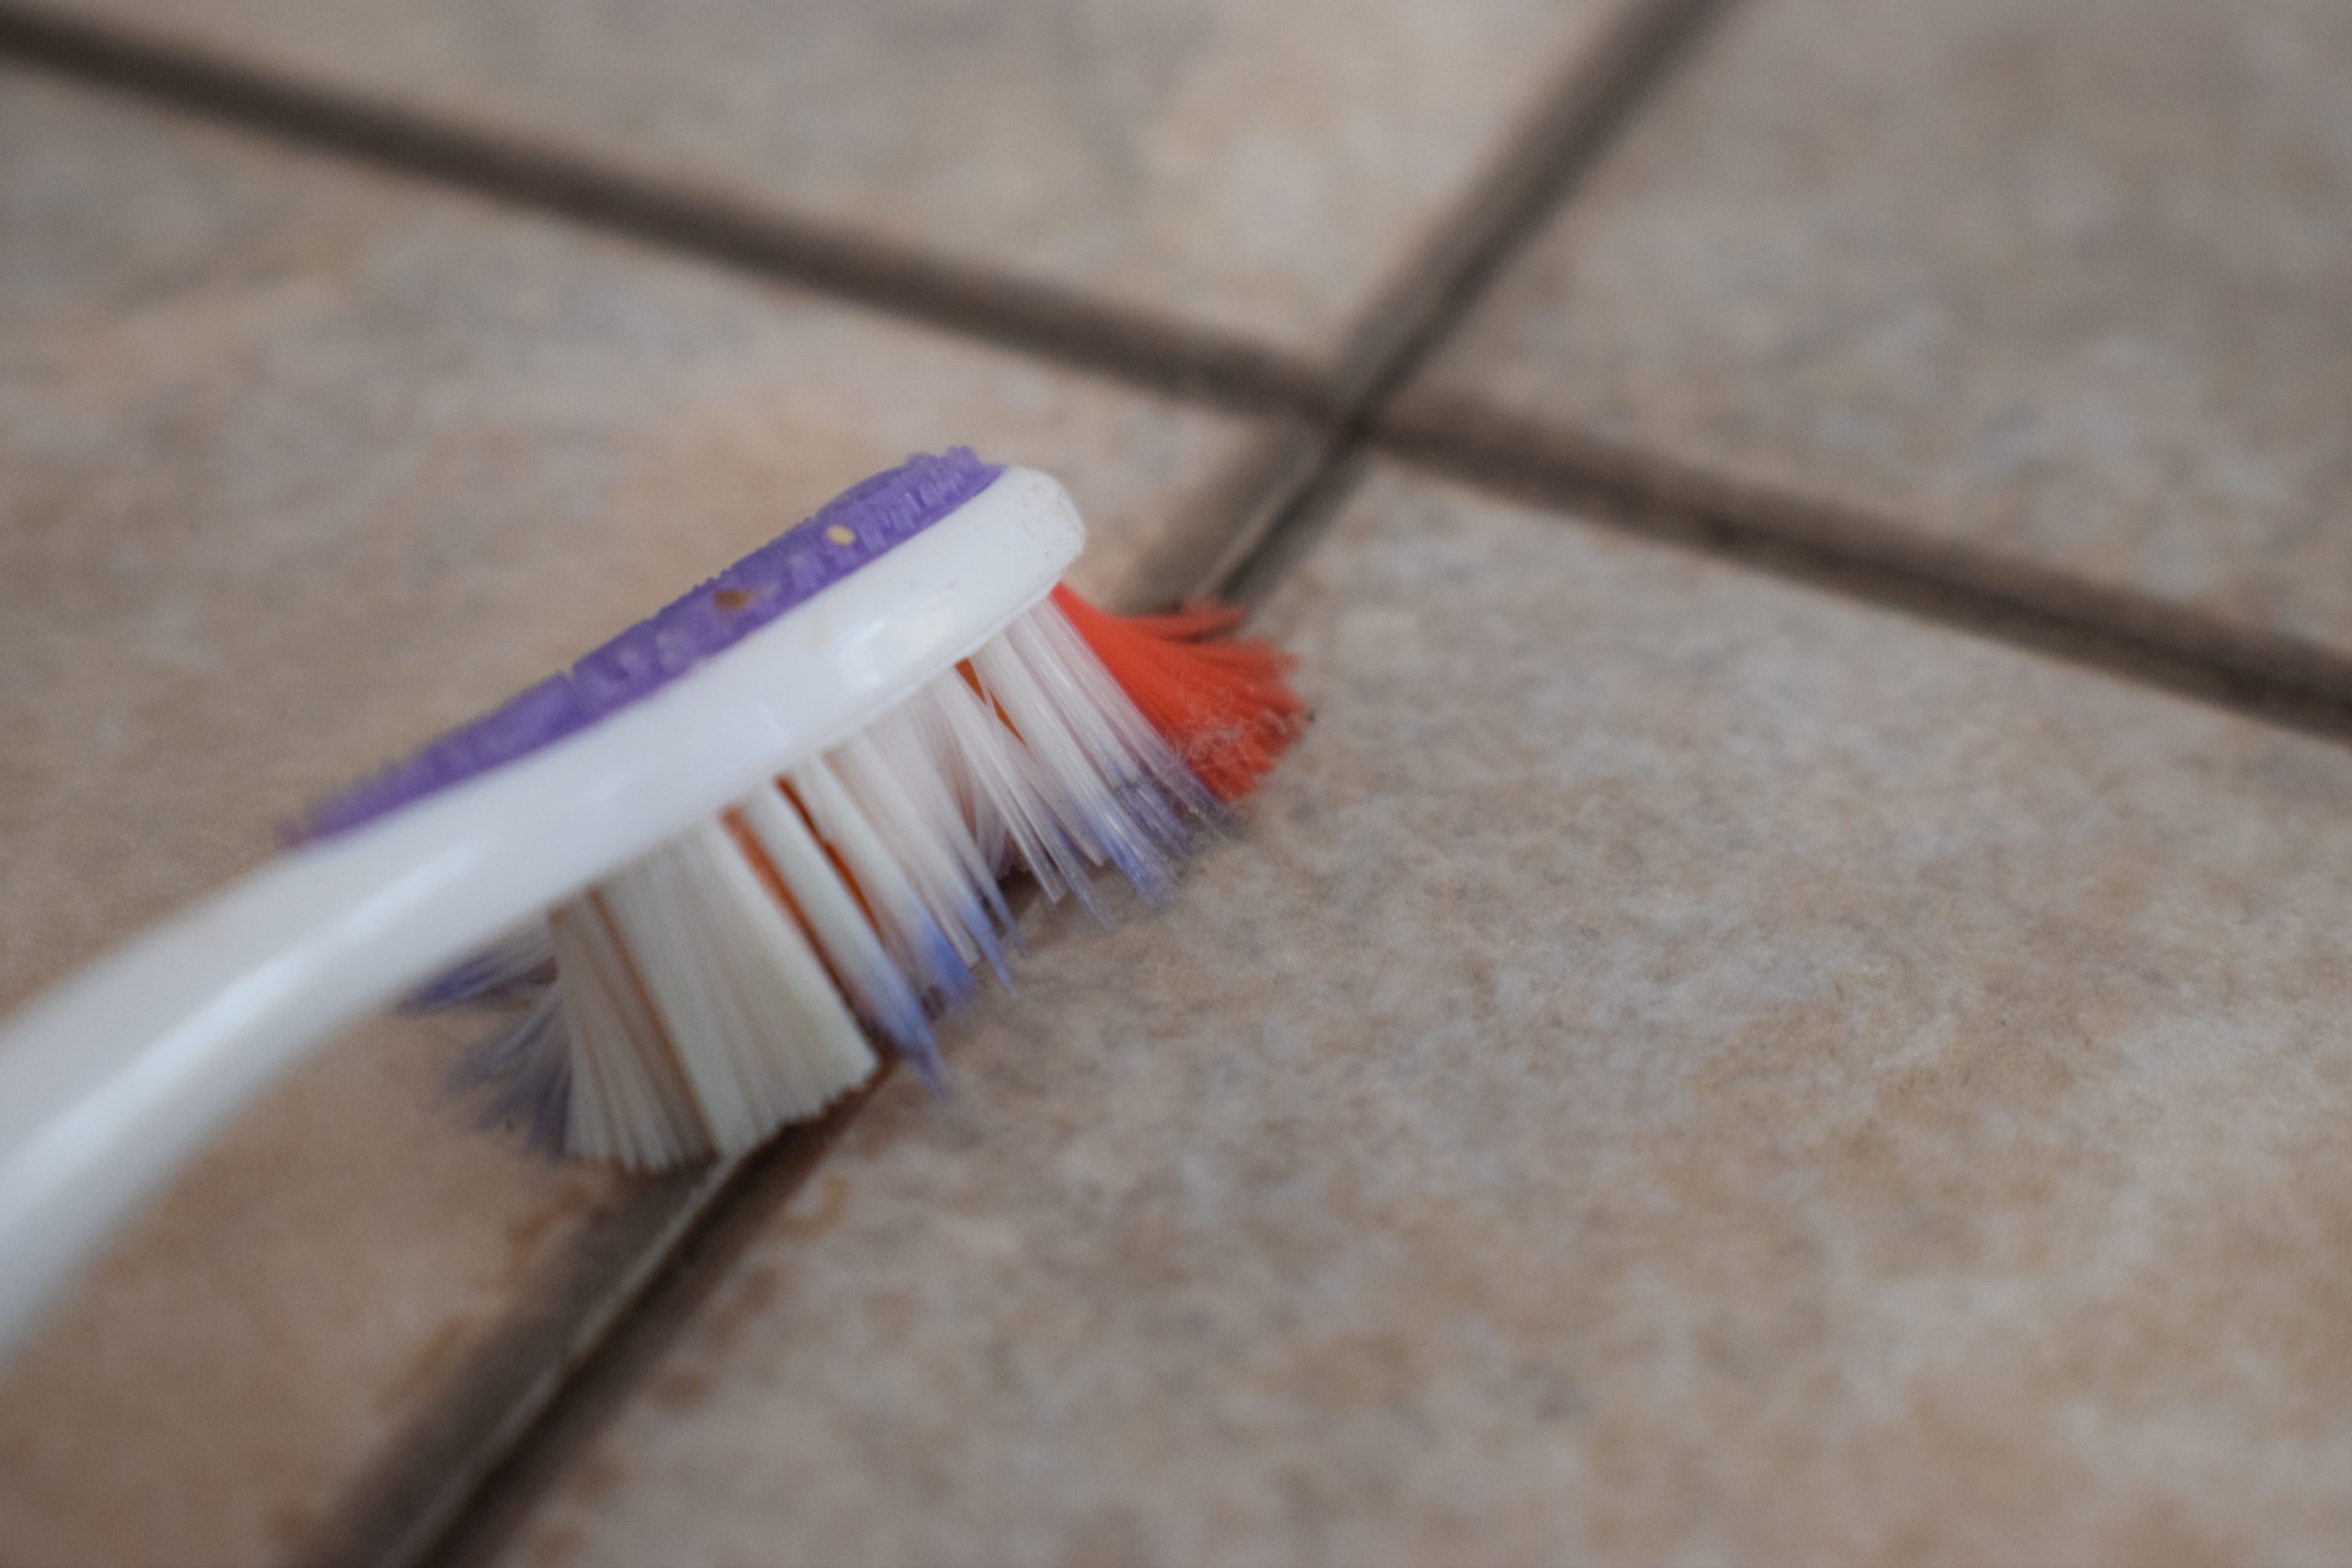 Purple, orange and white toothbrush scrubbing dirty tile grout